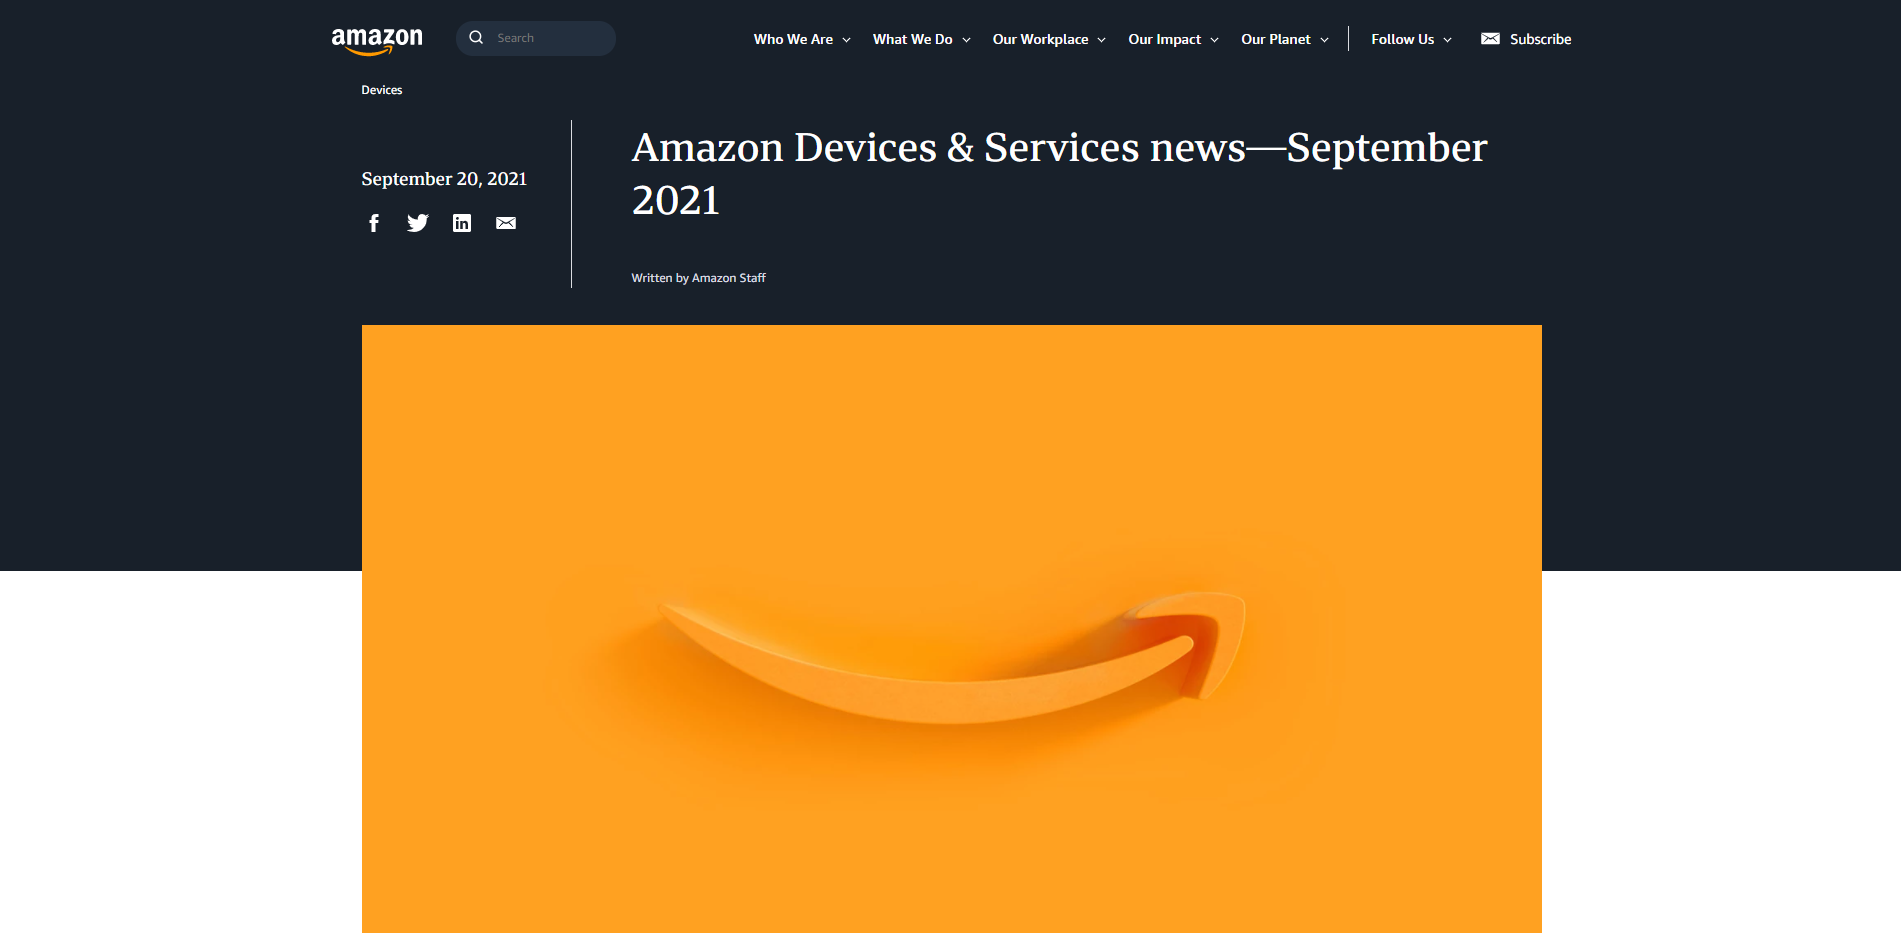 Amazon Devices & Services News—September 2021